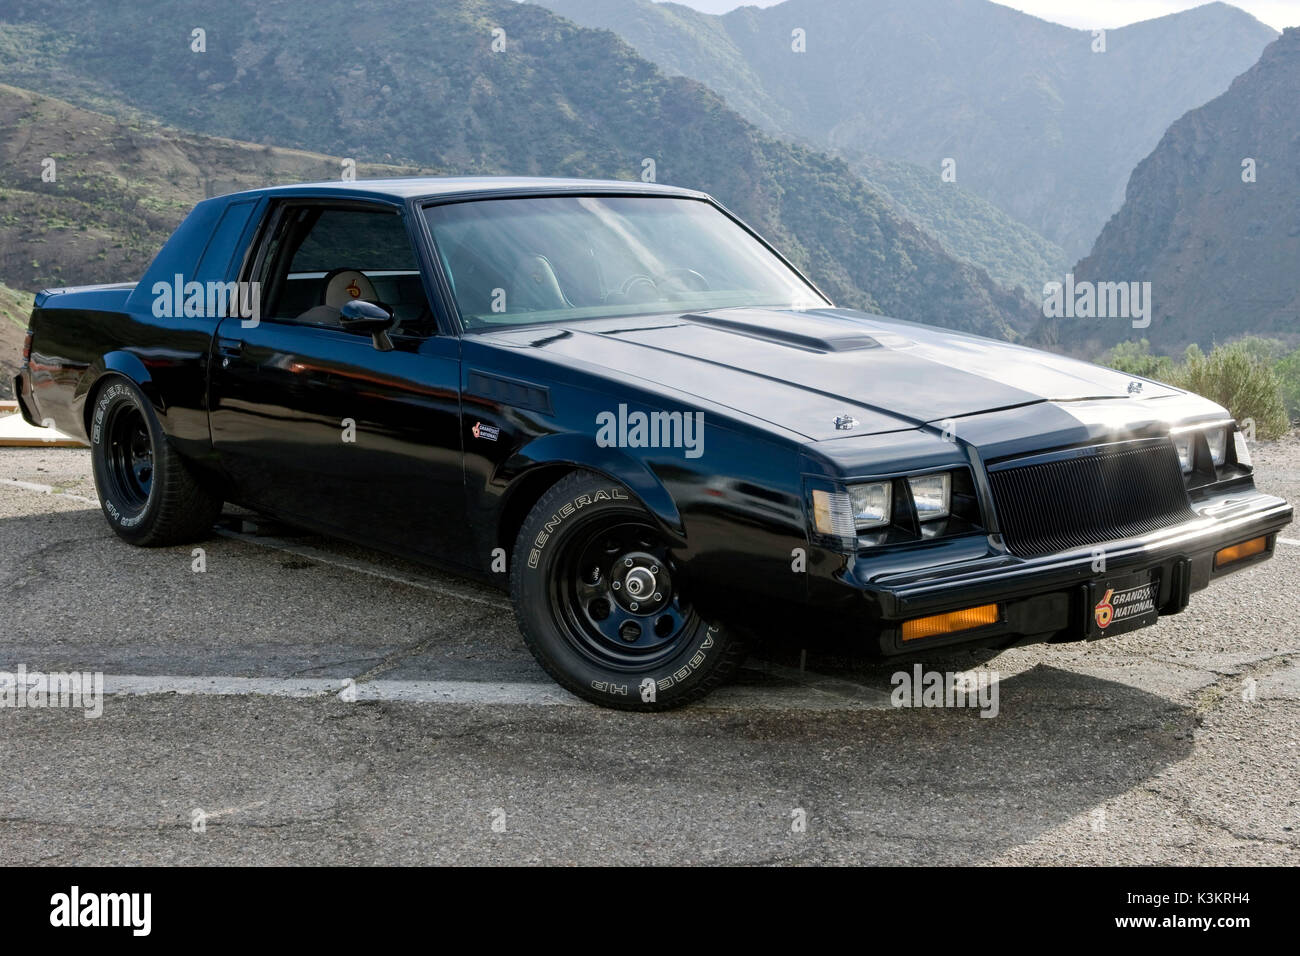 FAST & FURIOUS [US 2009], noto anche come FAST & FURIOUS 4 Dom Toretto's 1987 Buick Grand National data: 2009 Foto Stock